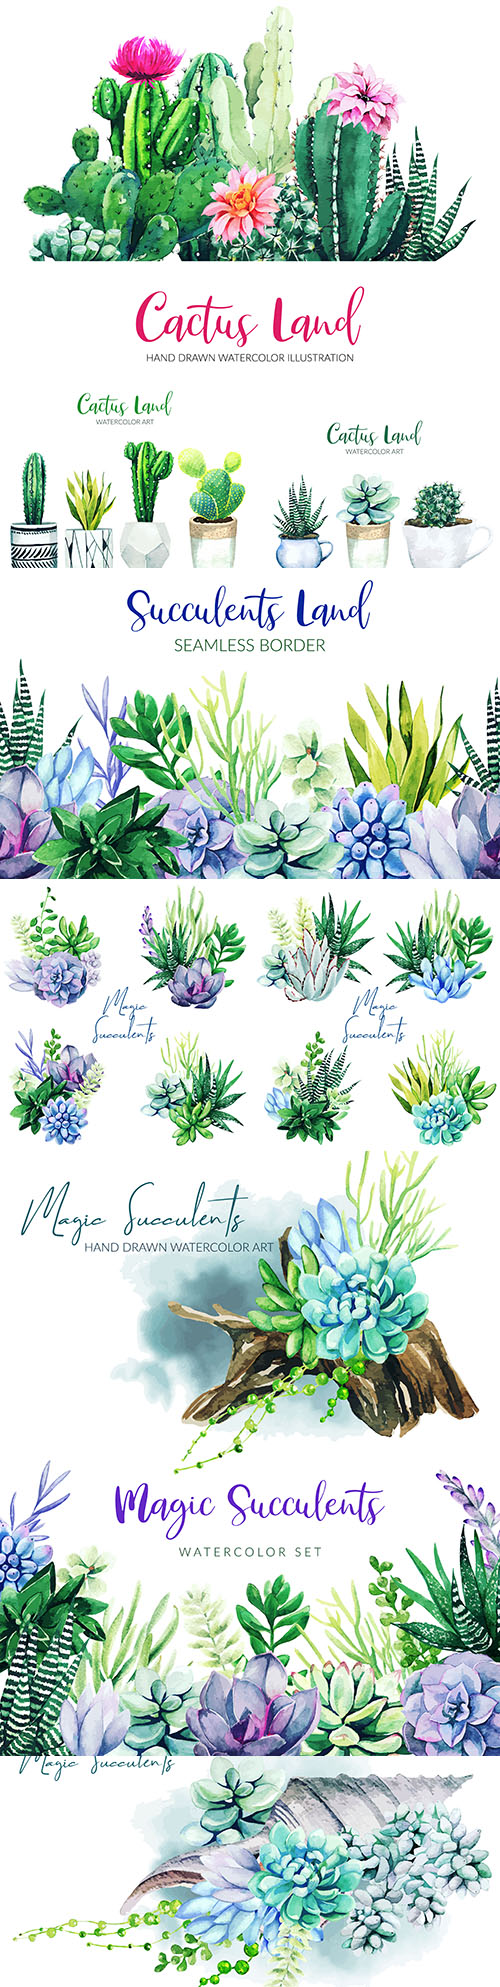 Cactus and tropical flowers design watercolor illustrations
